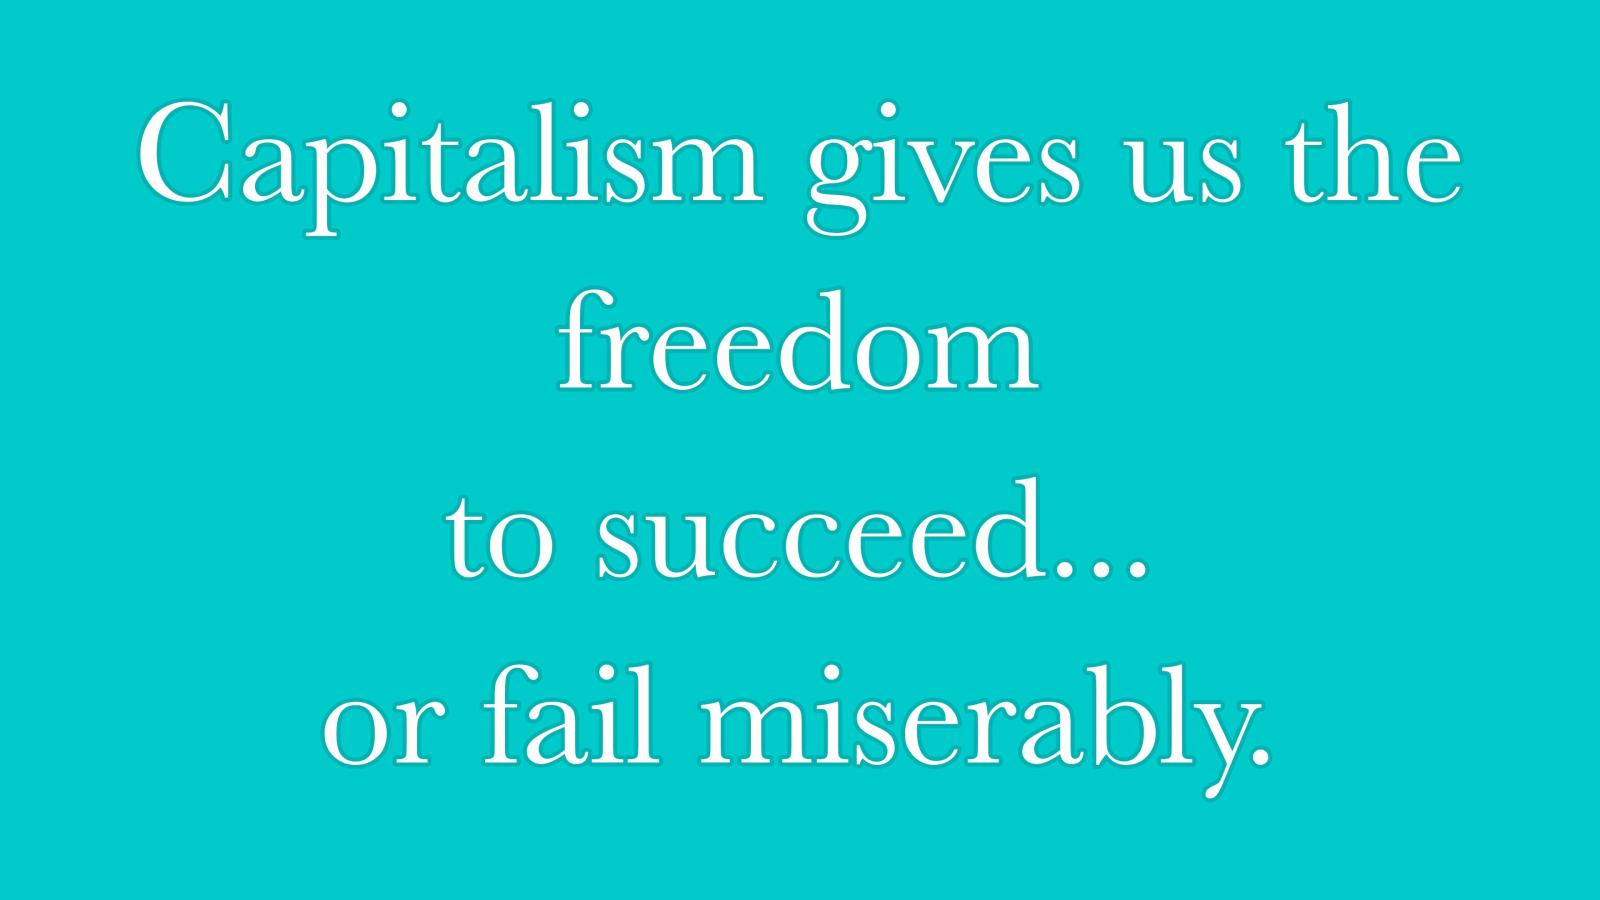 capitalism and freedom